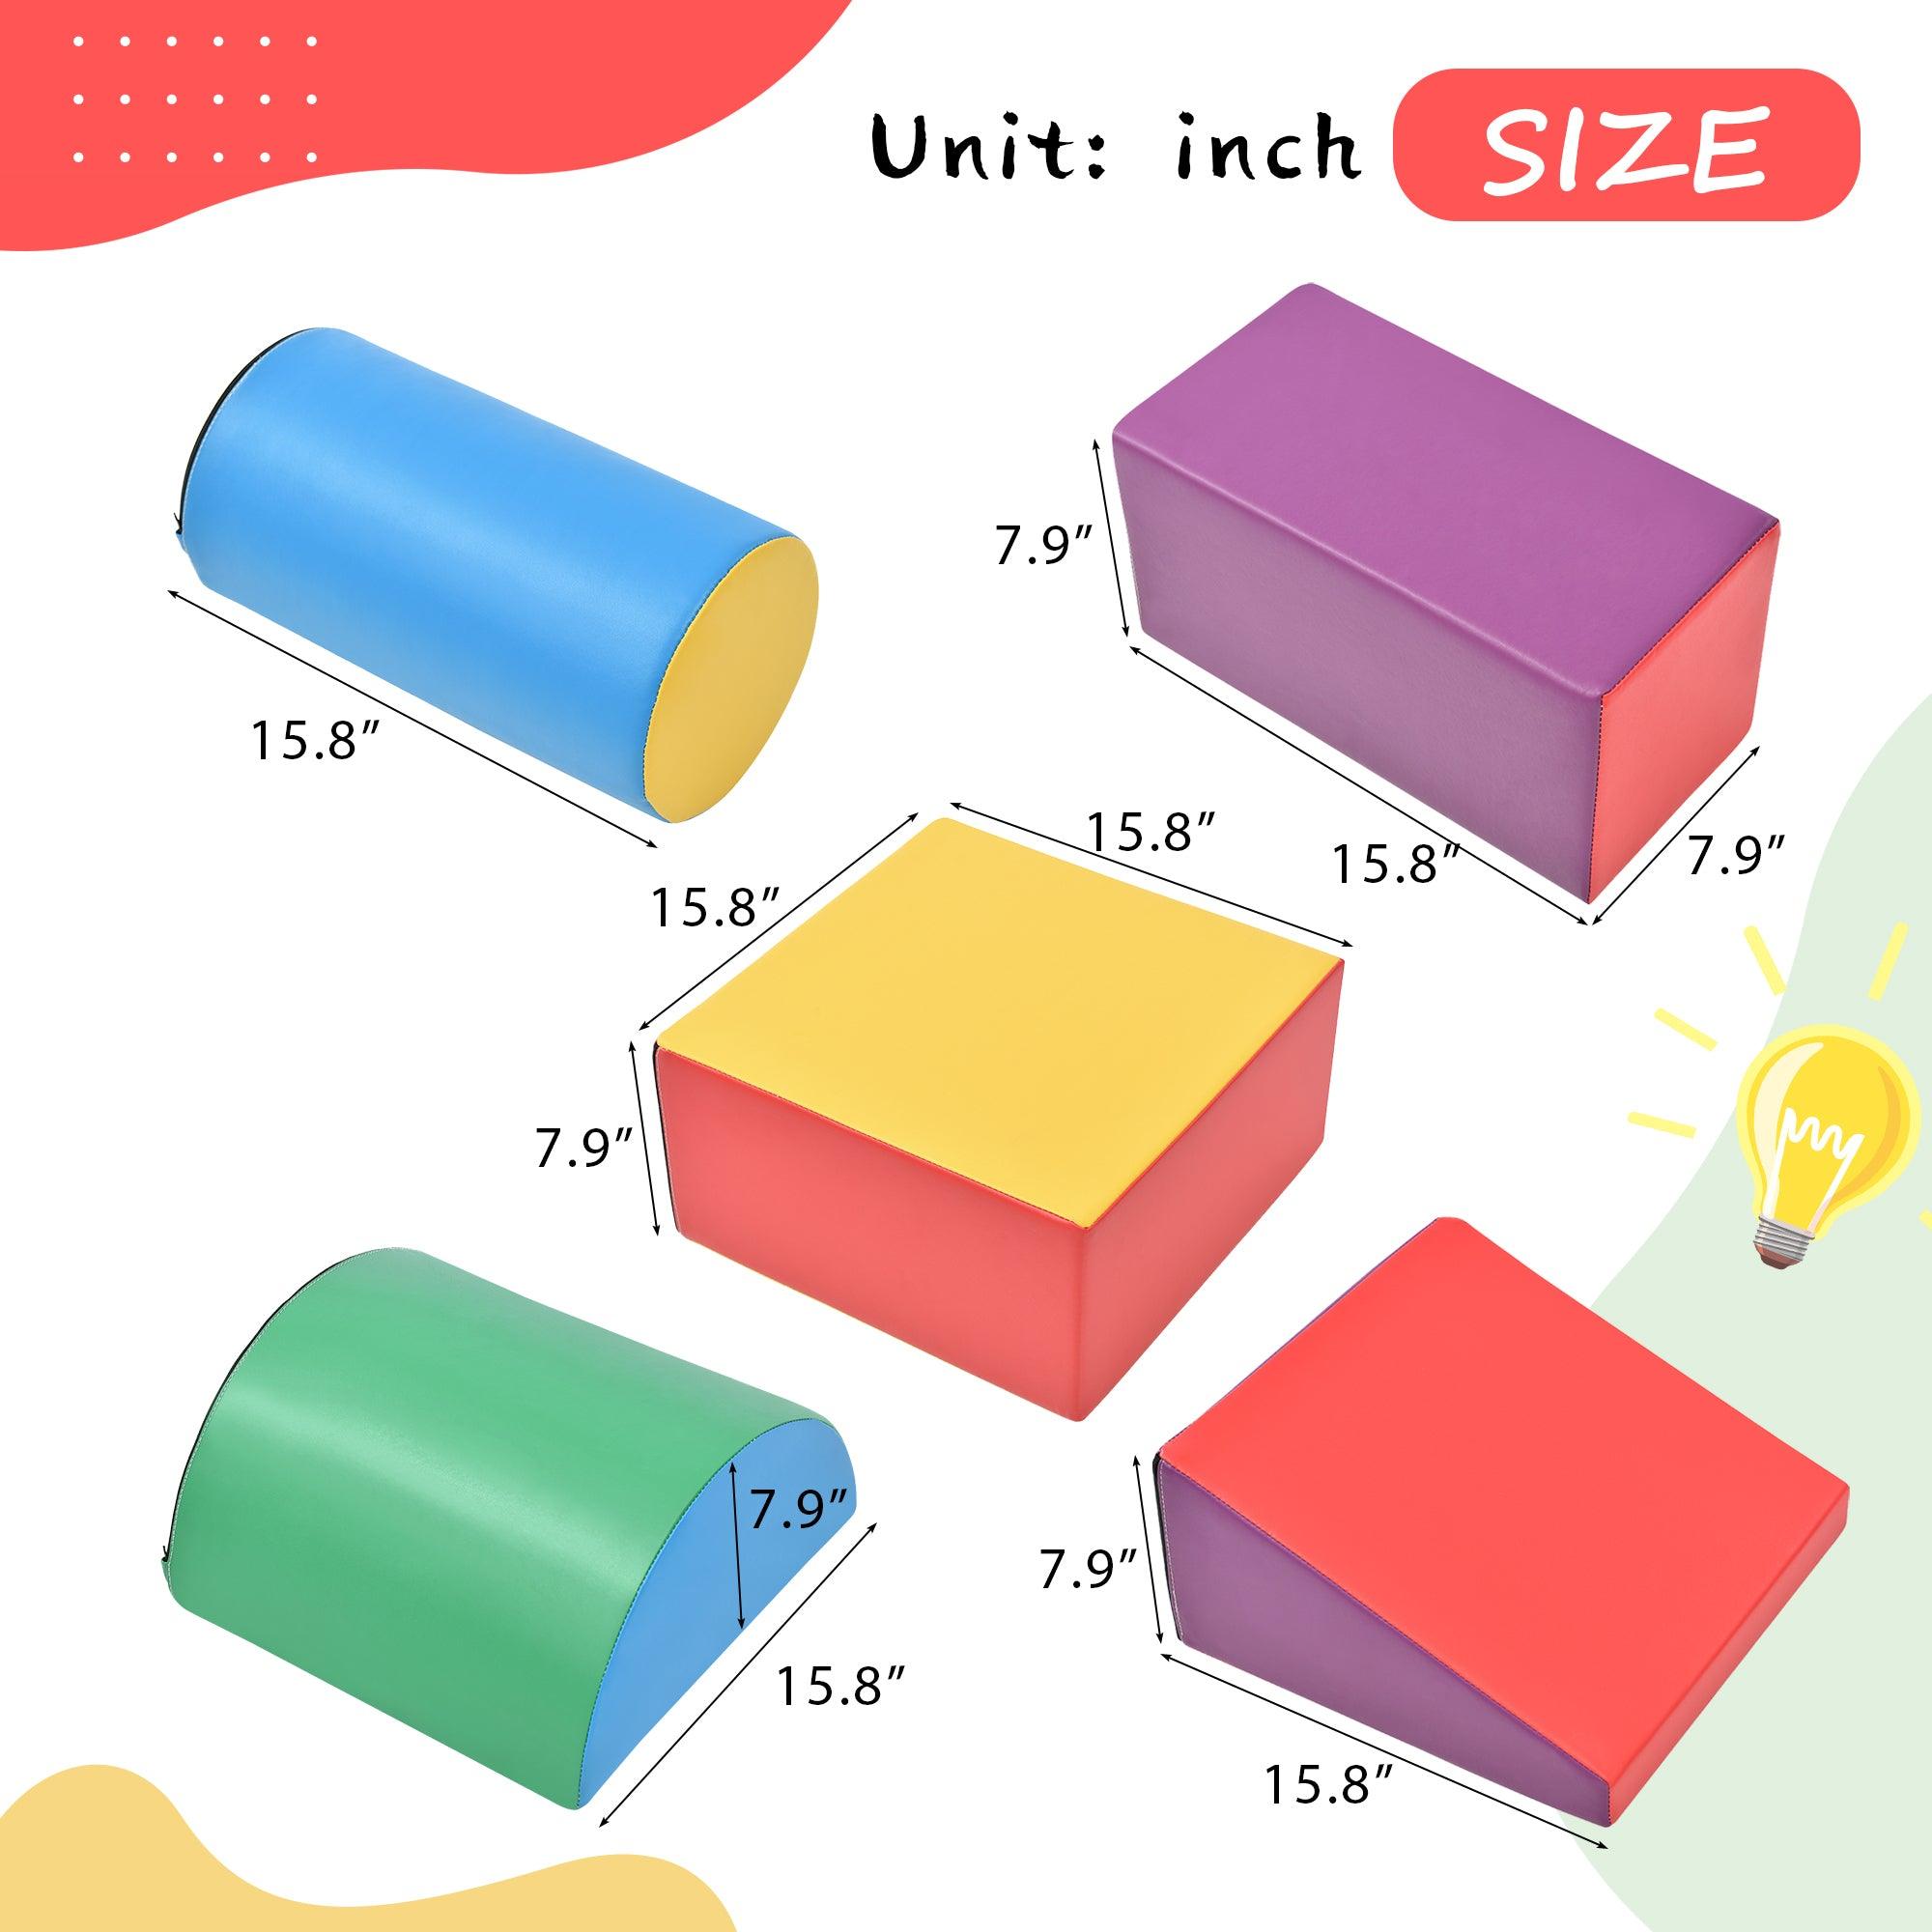 🆓🚛 Soft Climb & Crawl Foam Playset, Safe Soft Foam Nugget Shapes Block for Infants, Preschools, Toddlers, Kids Crawling & Climbing Indoor Active Stacking Play Structuretx